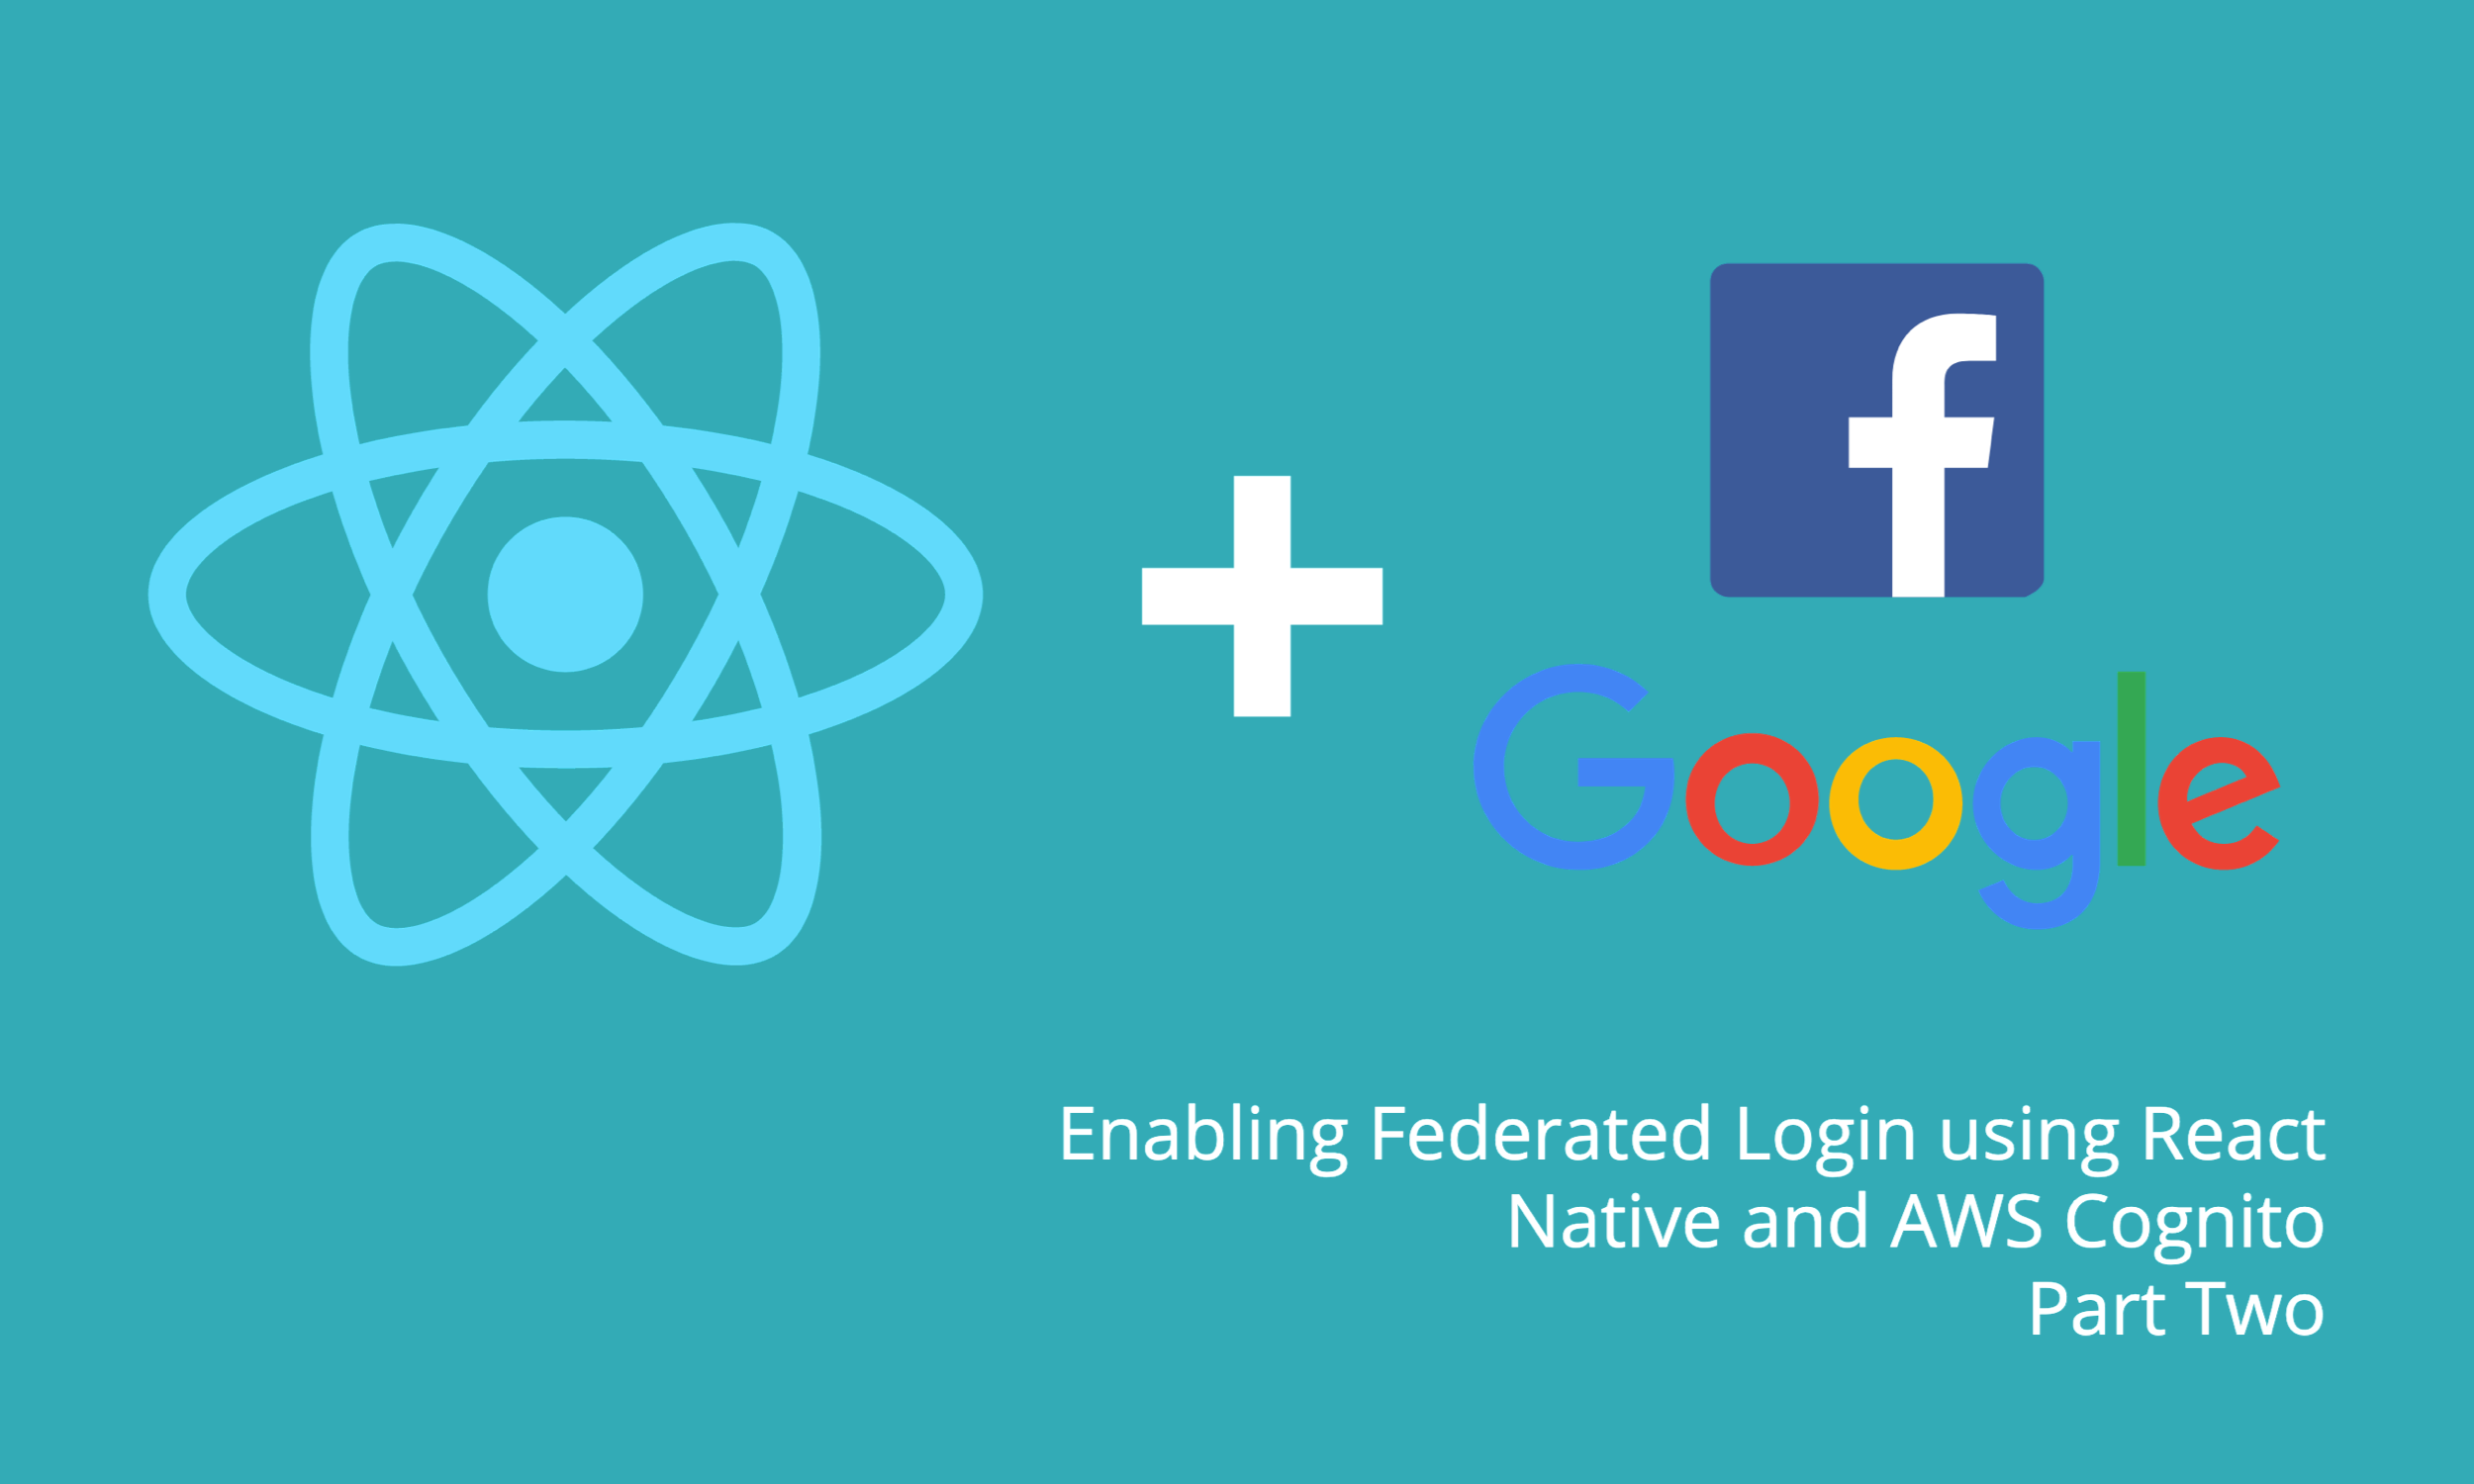 Setting up AWS Cognito and React Native to enable Federated SSO: Part 2